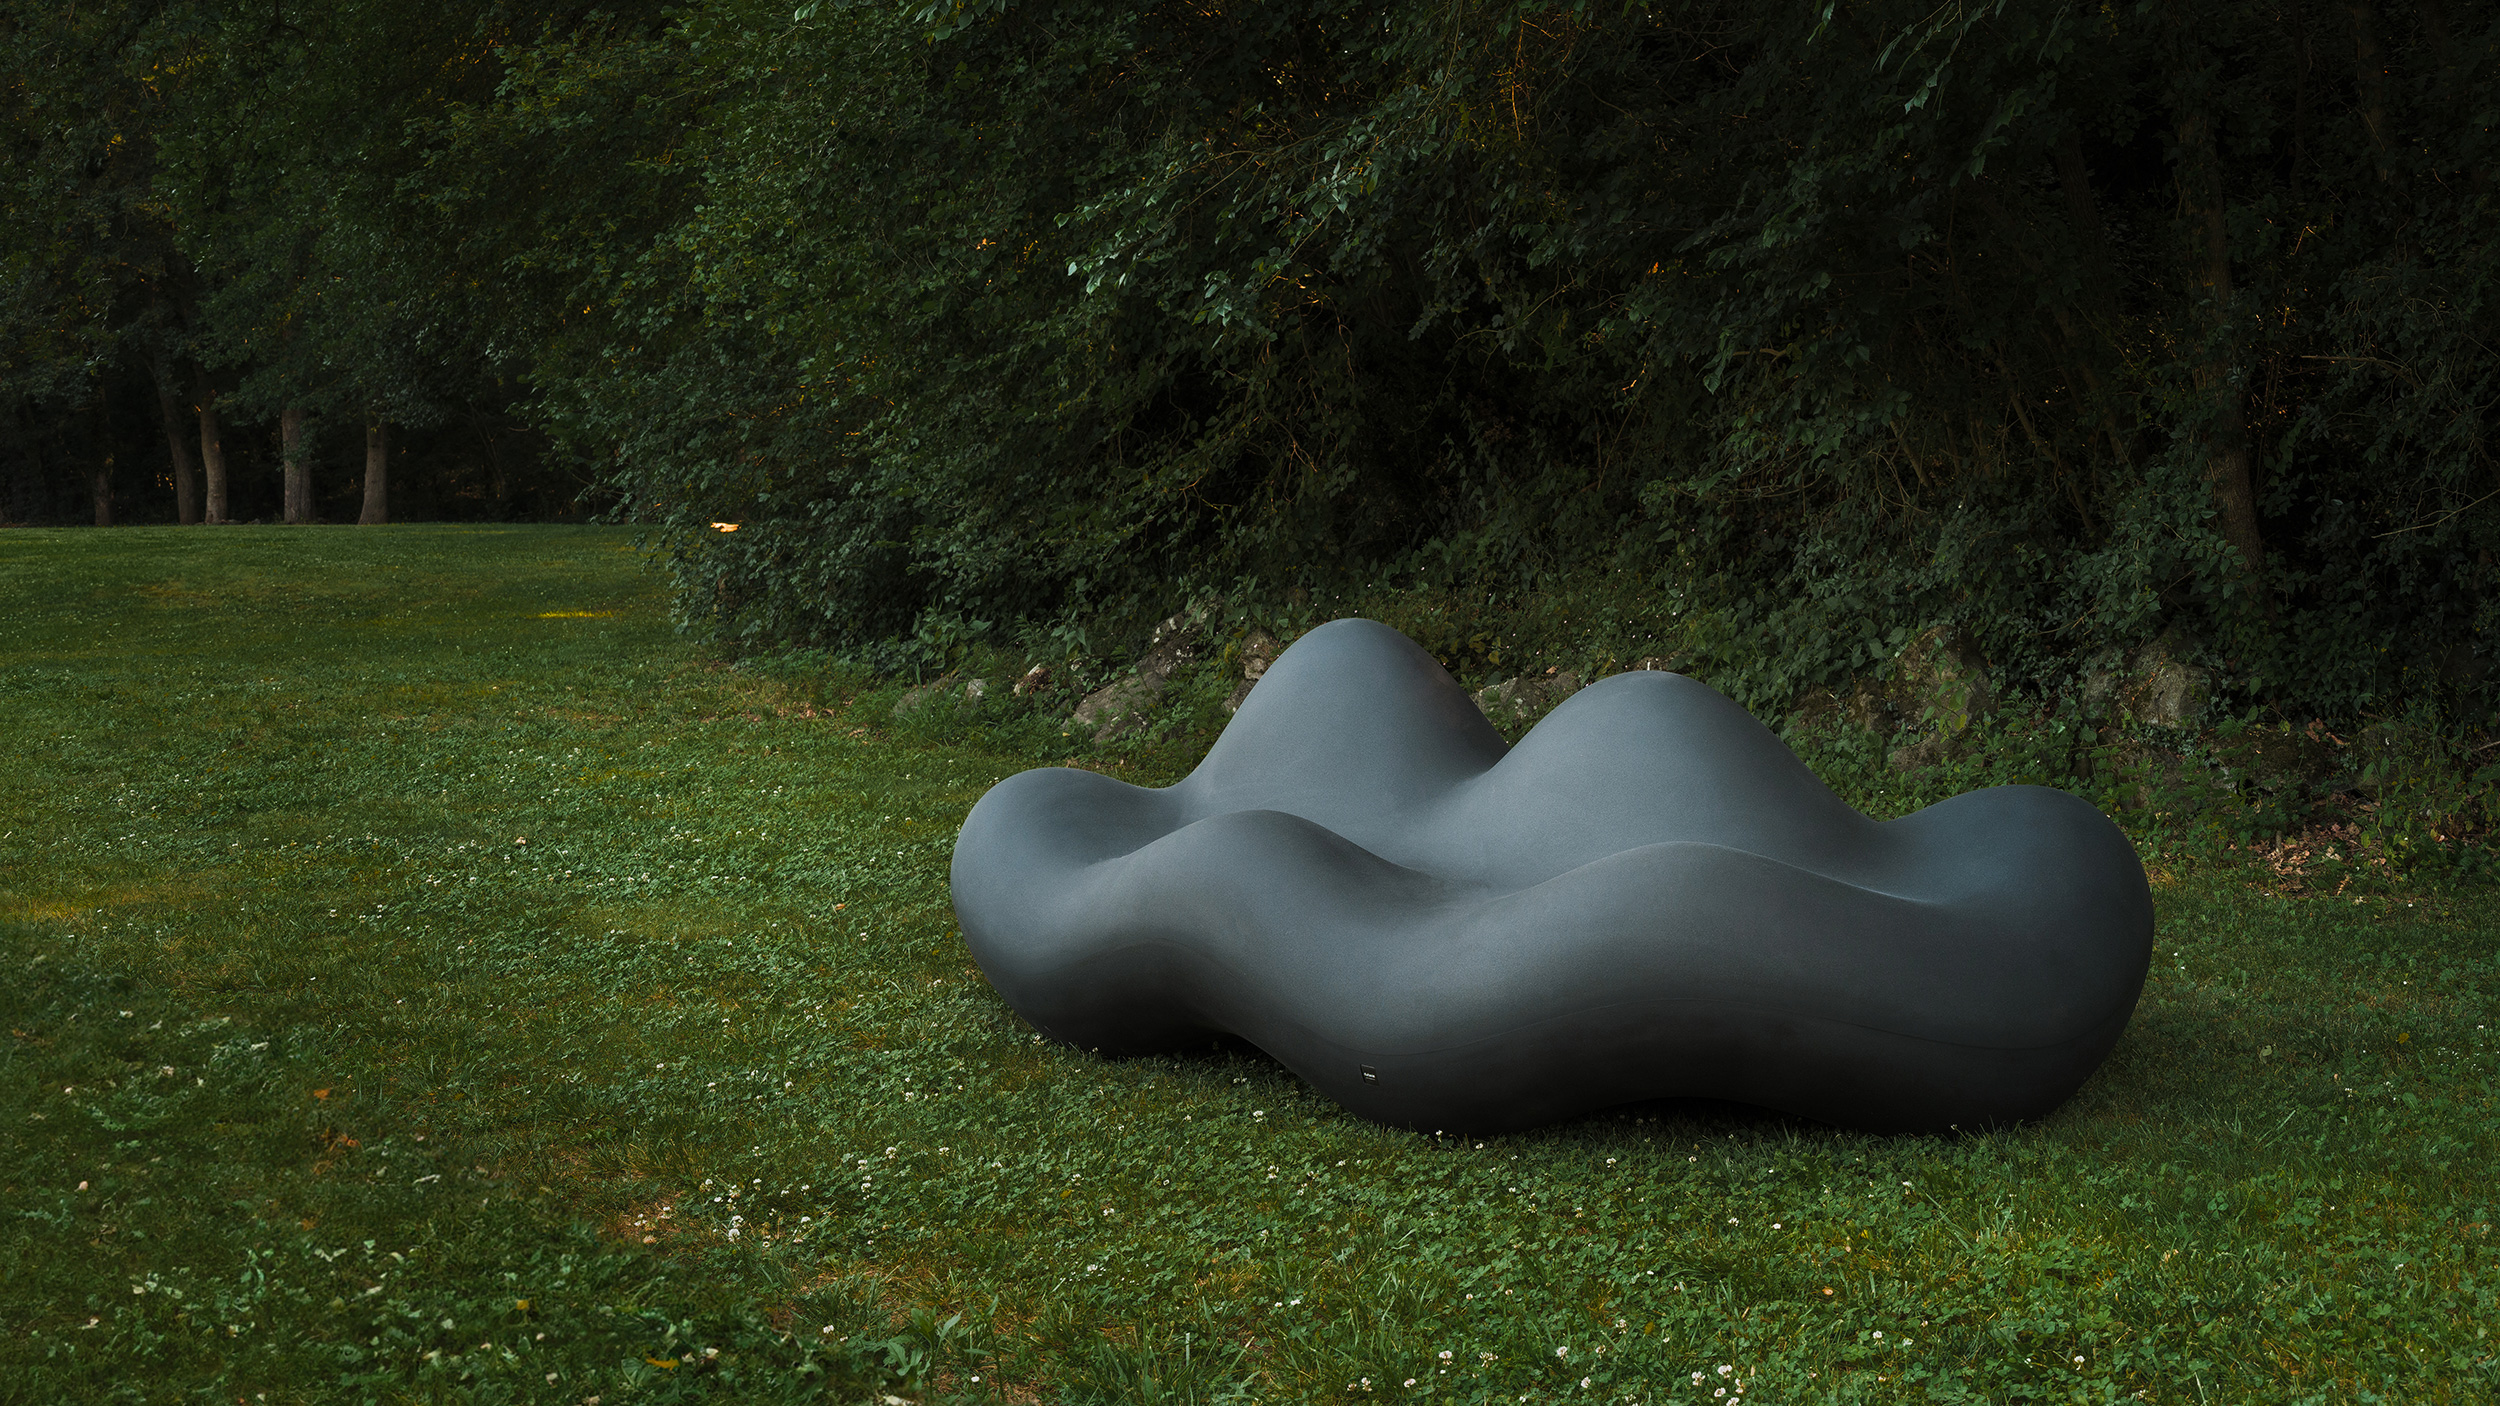 Bench with a sinuous design that blends in with the natural environment. Edited by Durbanis